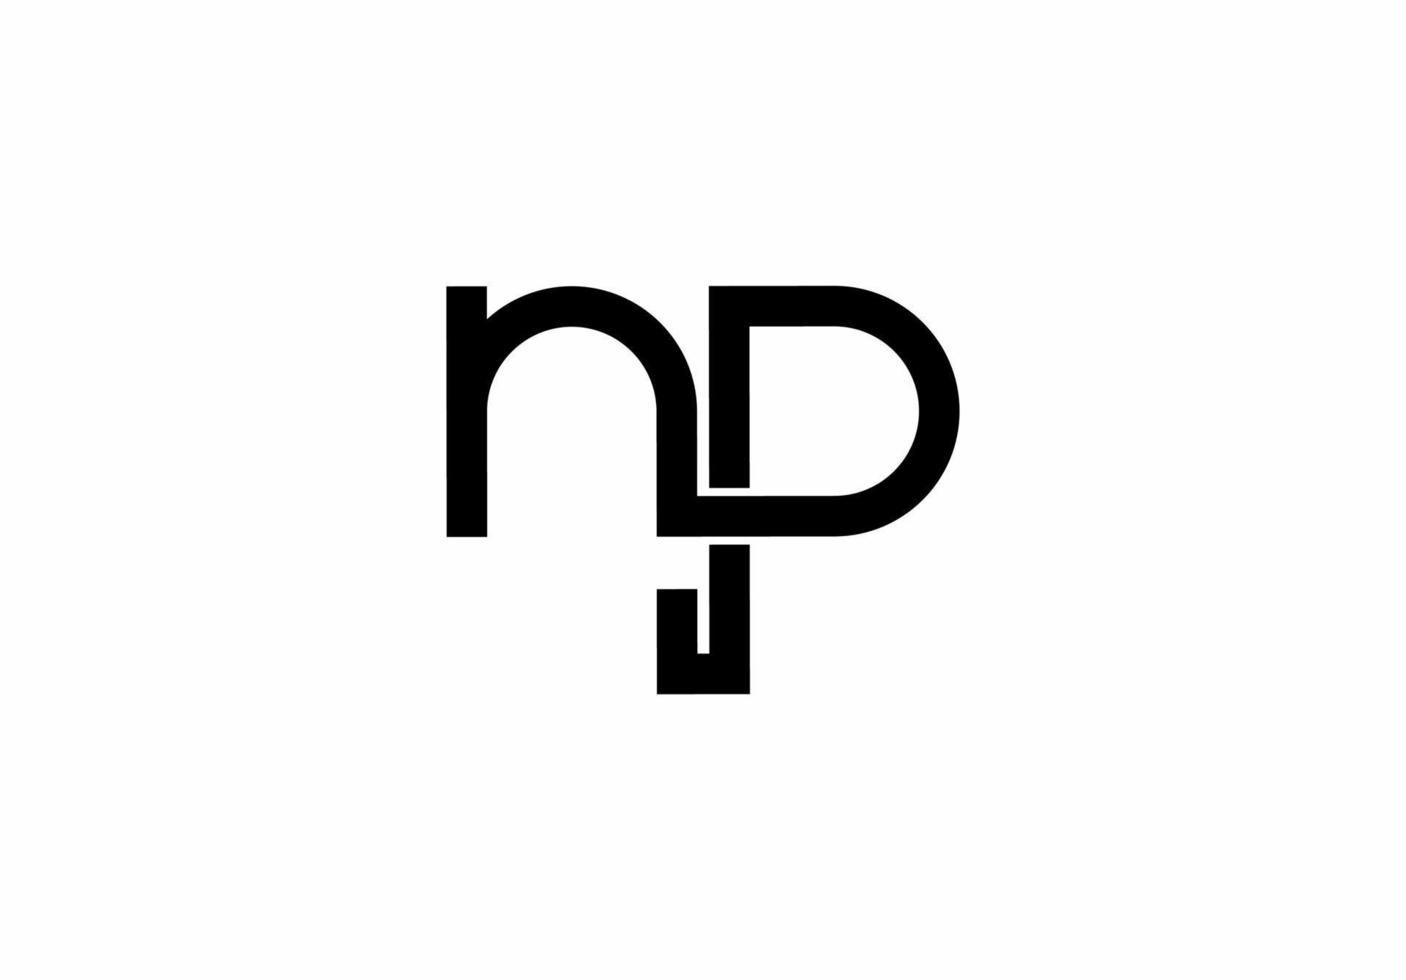 np pn n p initials letter logo isolated on white background vector